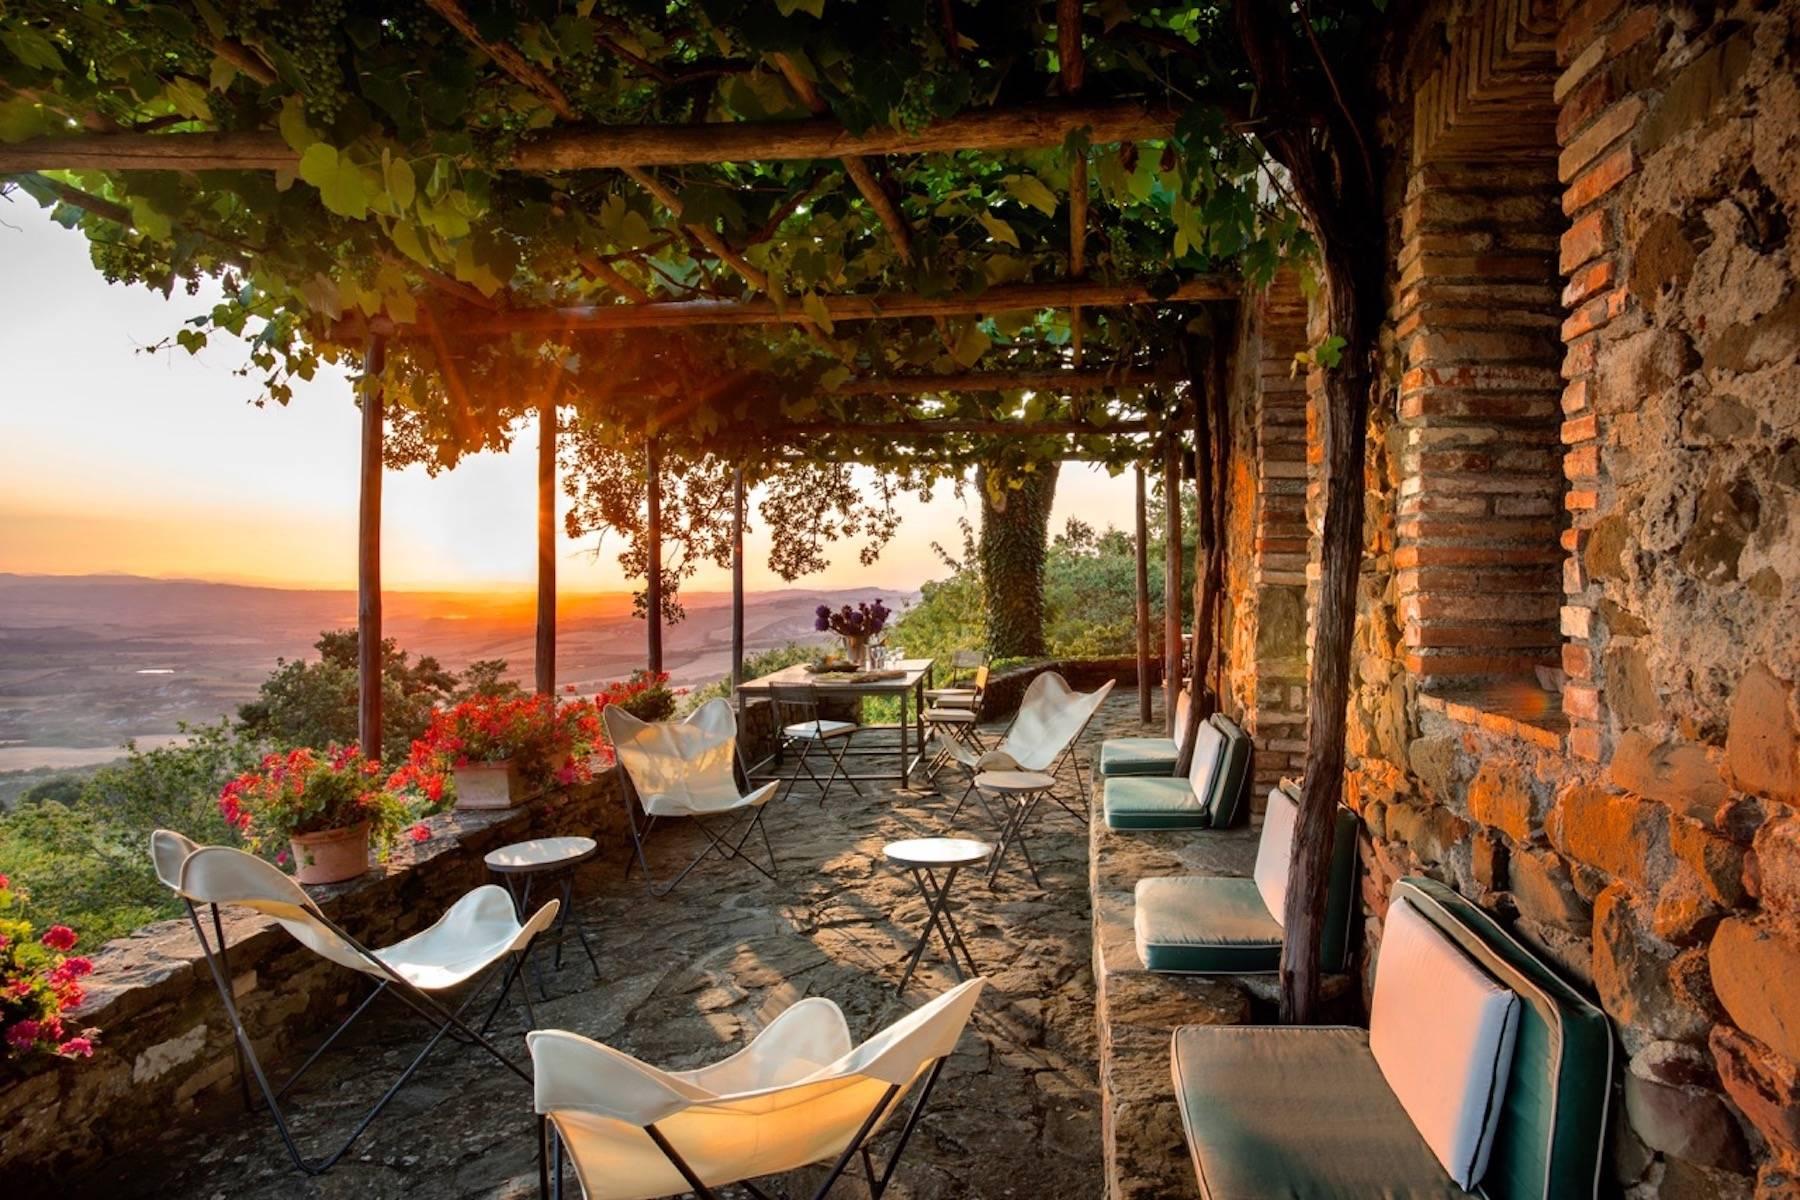 A charming rural villa situated in the idyllic Val d'Orcia - 1